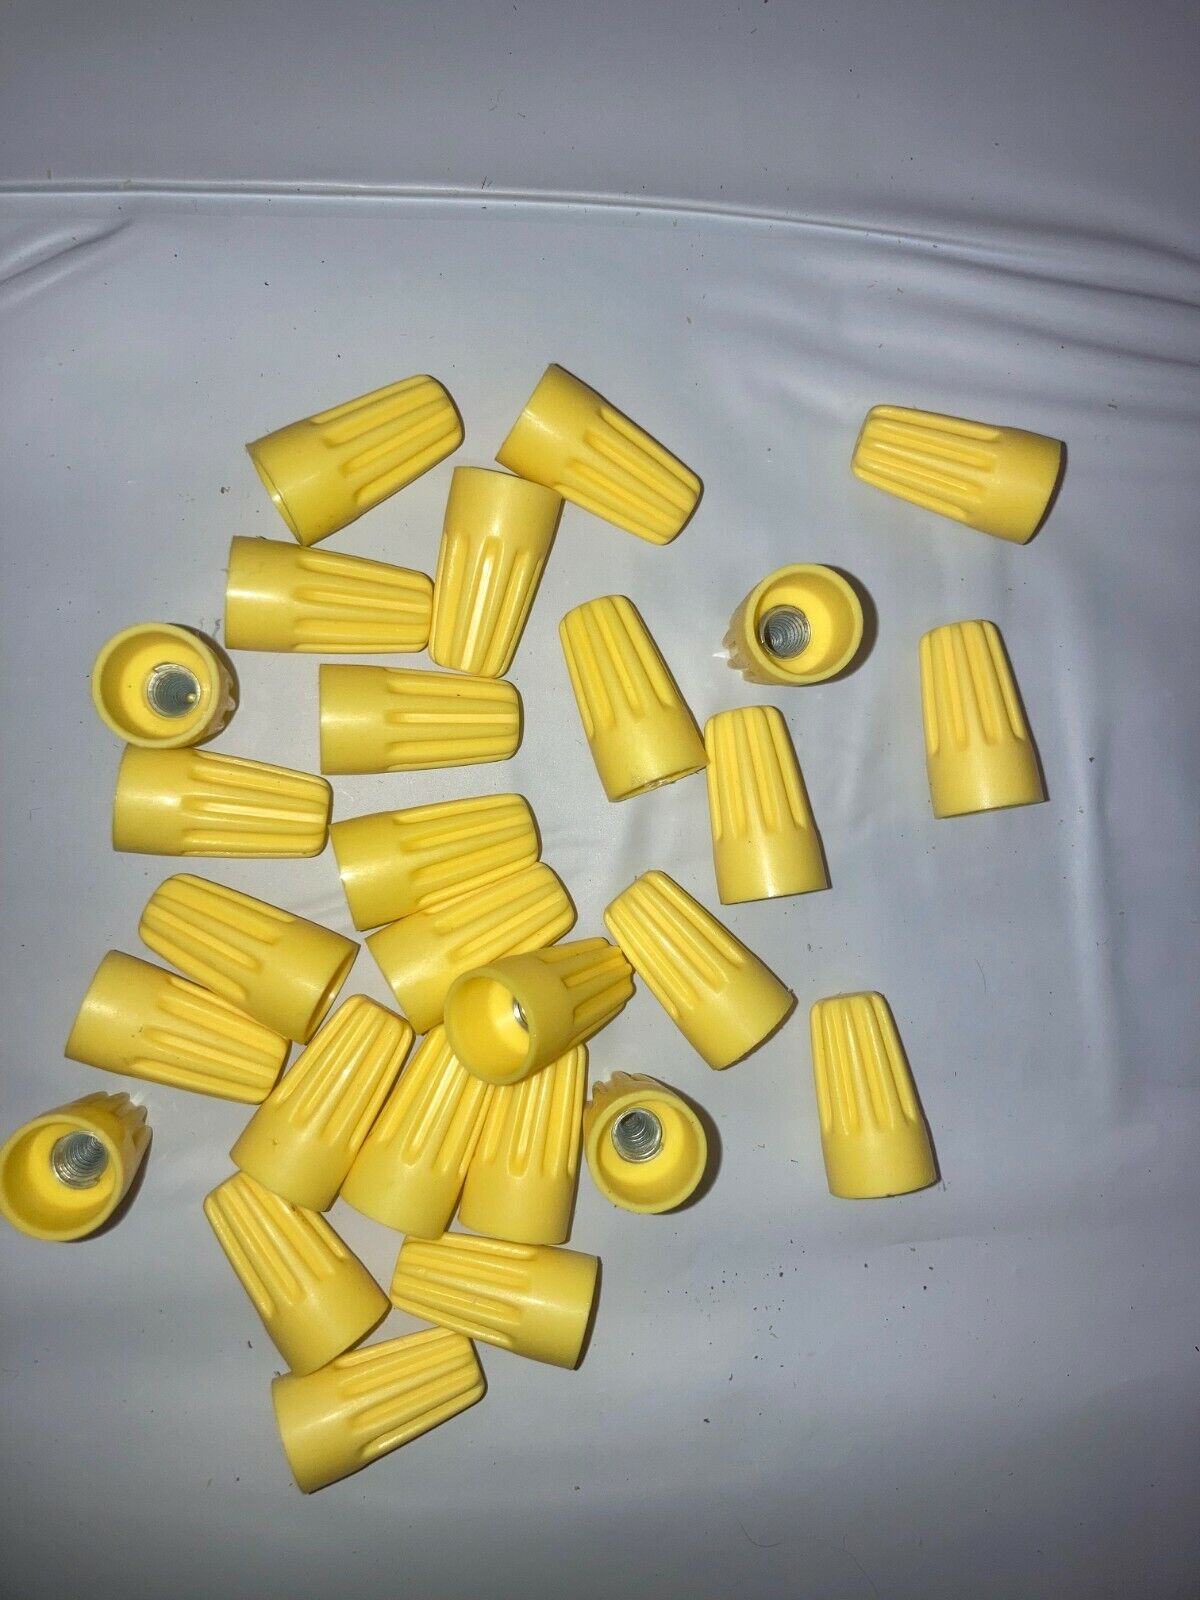 Yellow Wire Connector 22-10 AWG 100ct Nuts, Regular/Non-Winged, GB, BULK Gardner Bender